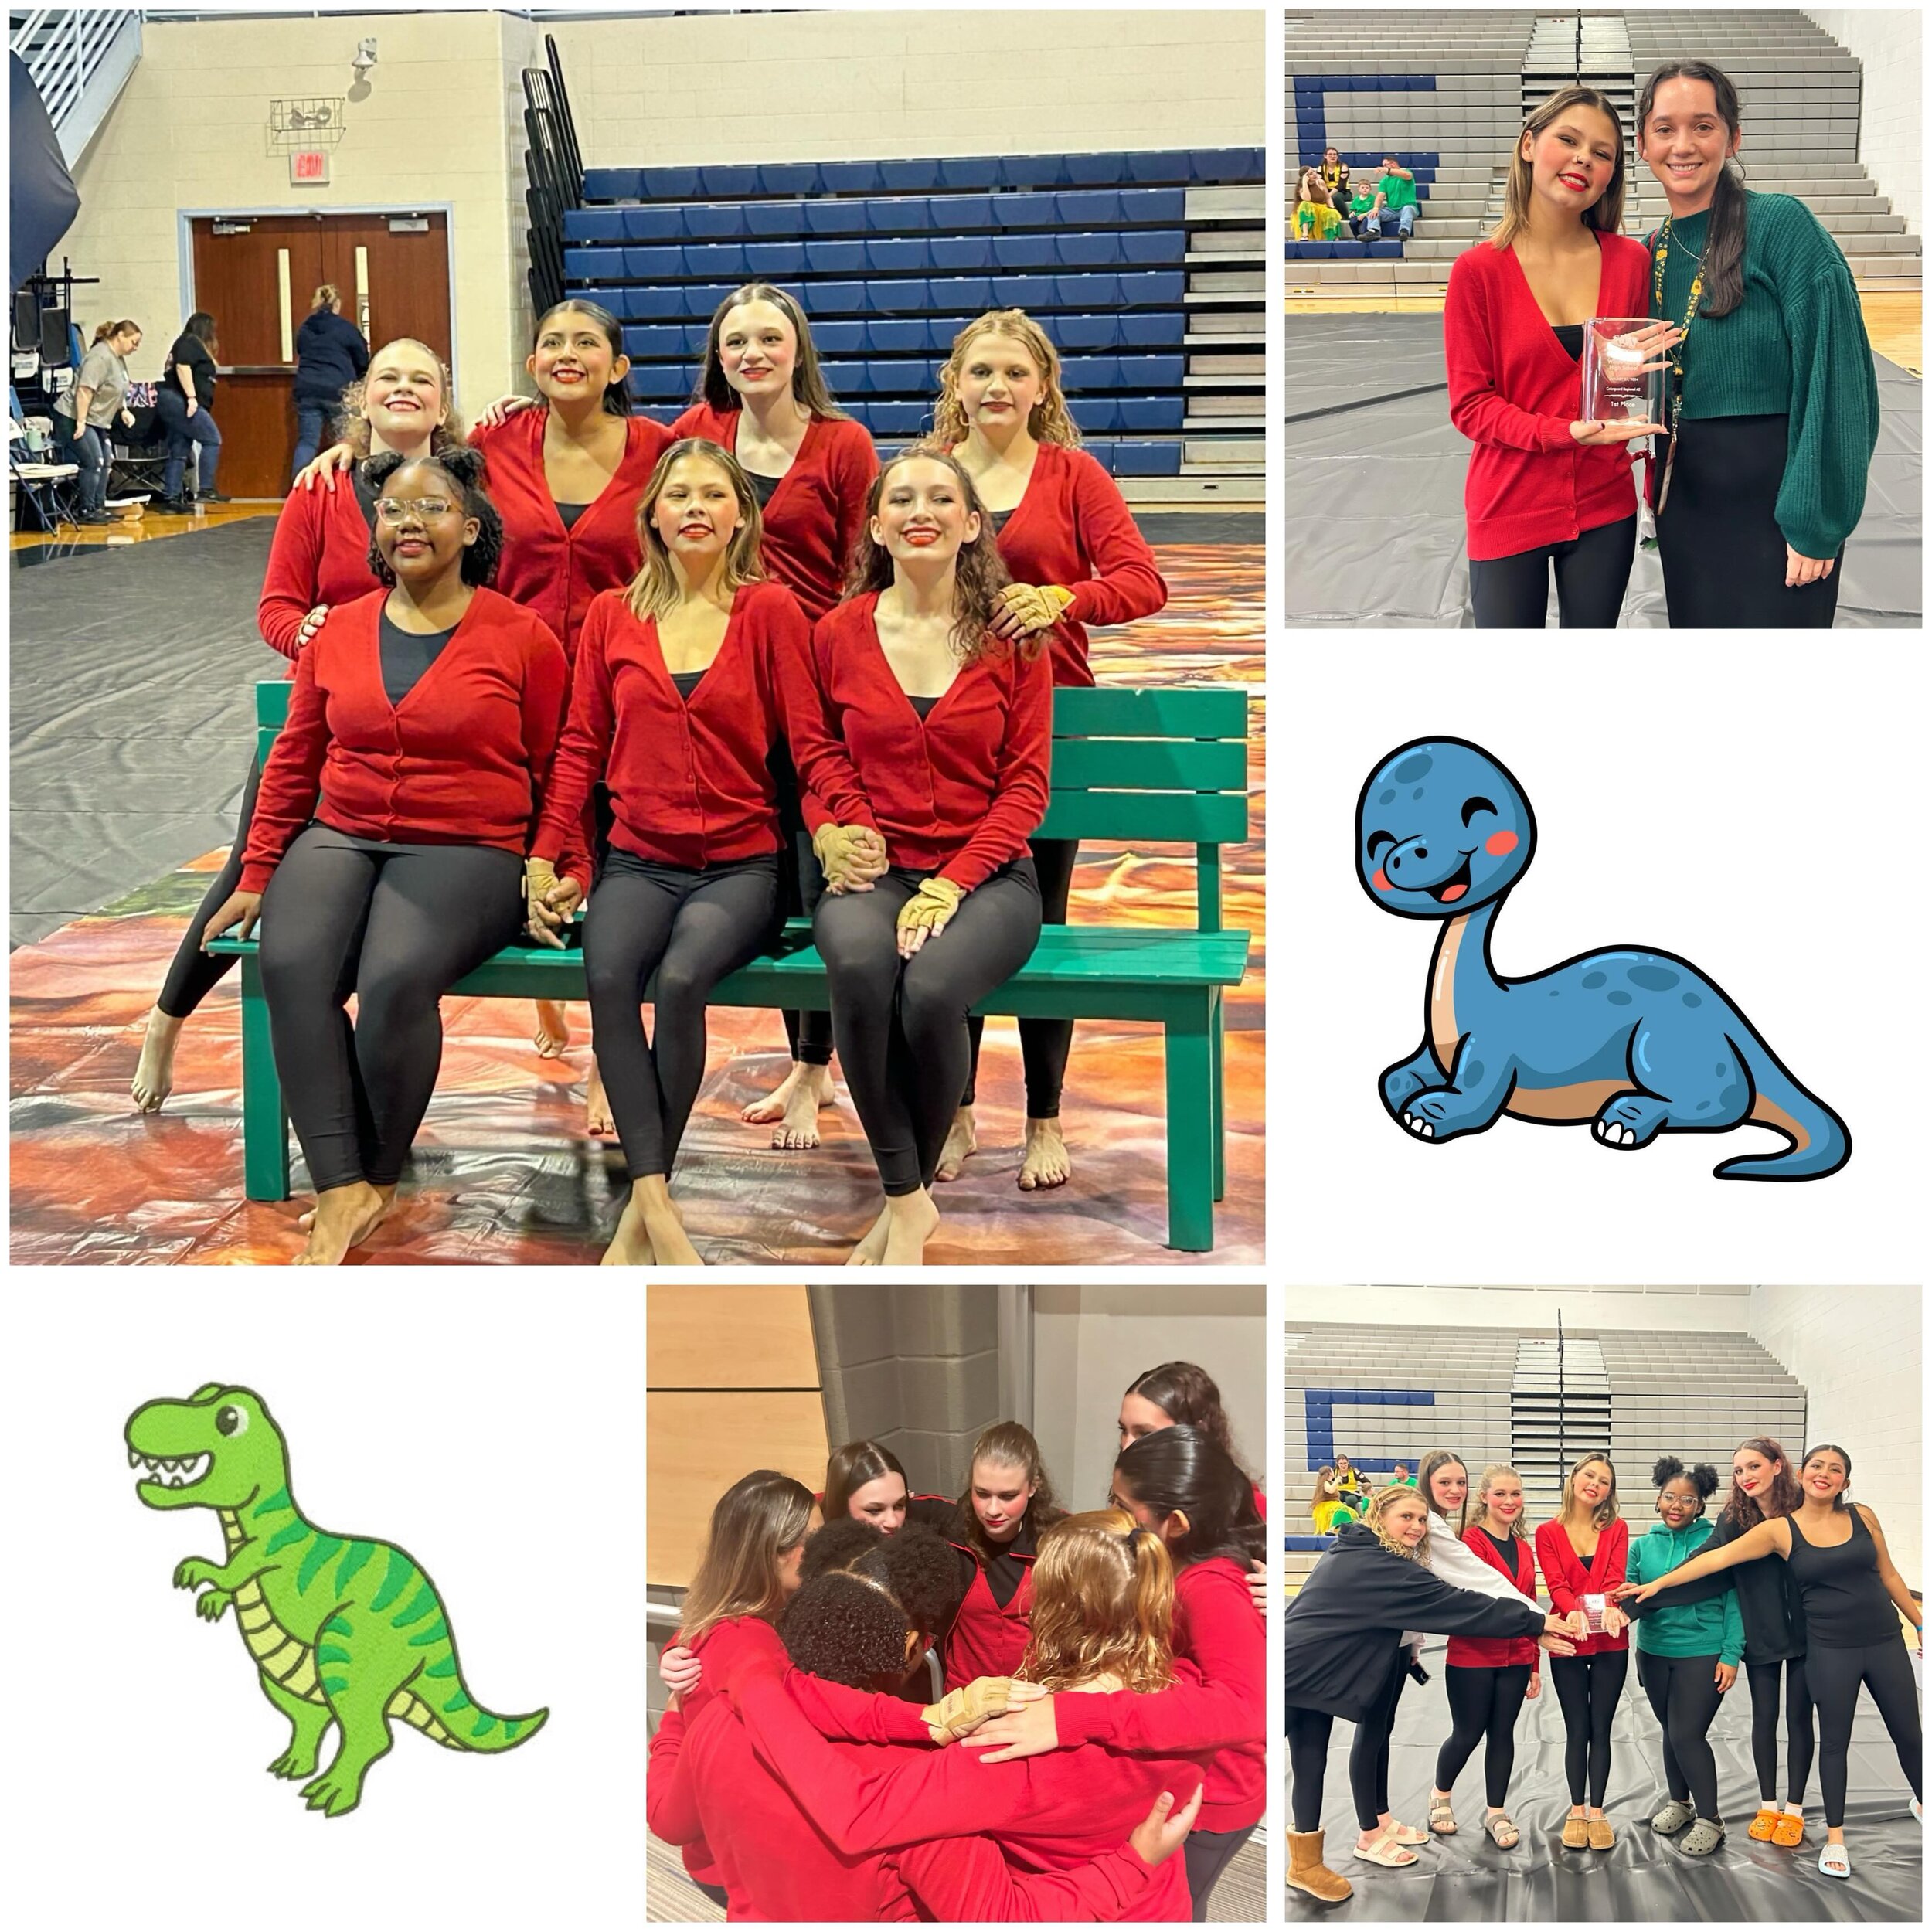 Hello from the Sanderson Winter Guard! 
We are announcing DINOGRAMS, if you would like to support the Sanderson Winter Guard I hope you will make a 5 dollar donation to write a sweet message and a cute toy dino for the guard to be given at the AIA Ch